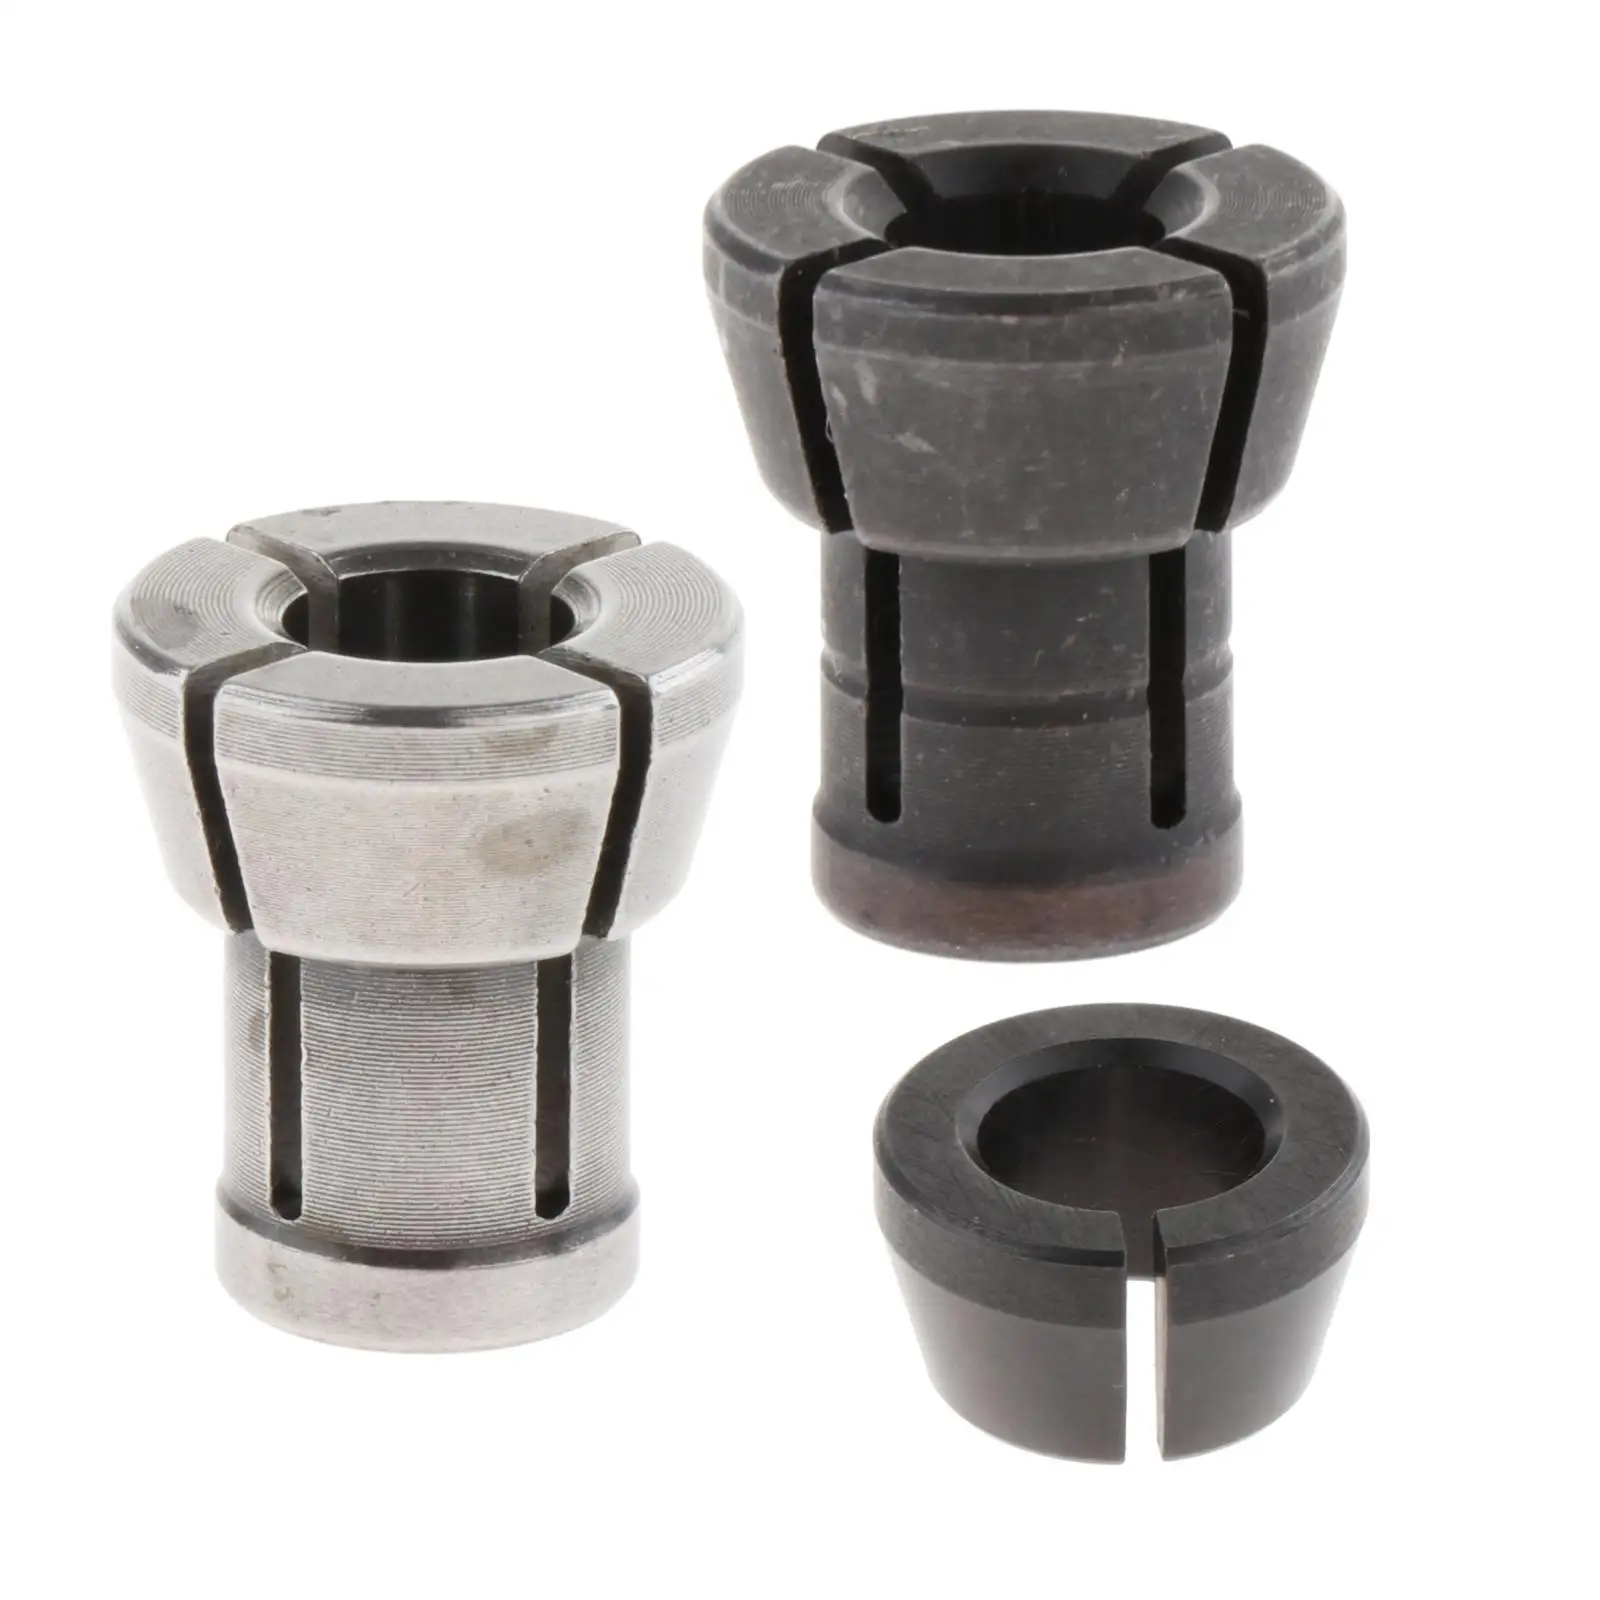 Carbon Steel Bit Collet Chuck Clamping Adapter Replacement Accessories